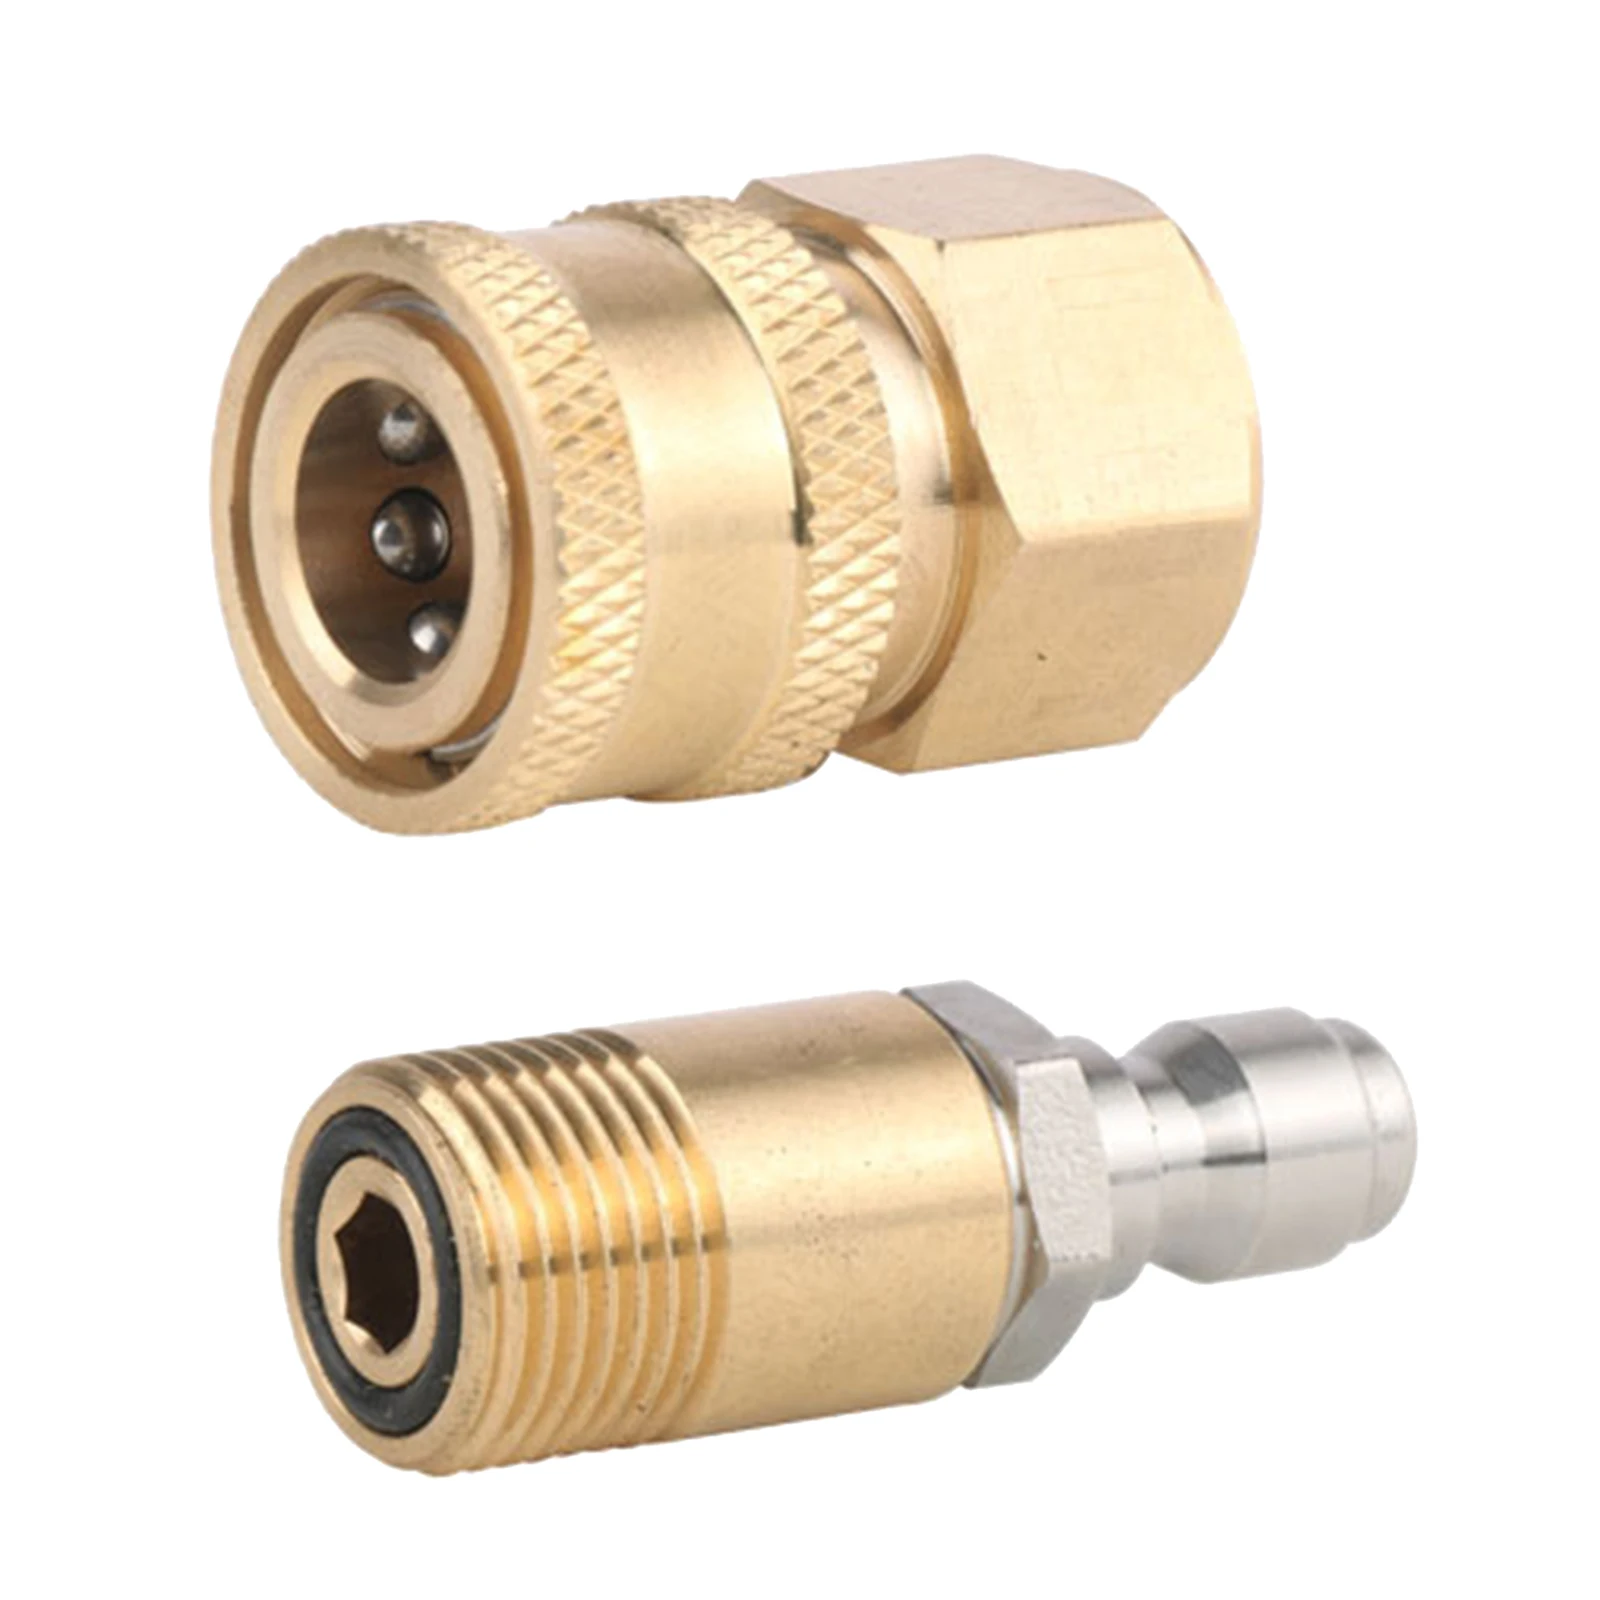 Pressure Washer Twist Connect Adapter Connector 22mm Male X 1/4'' Female New 